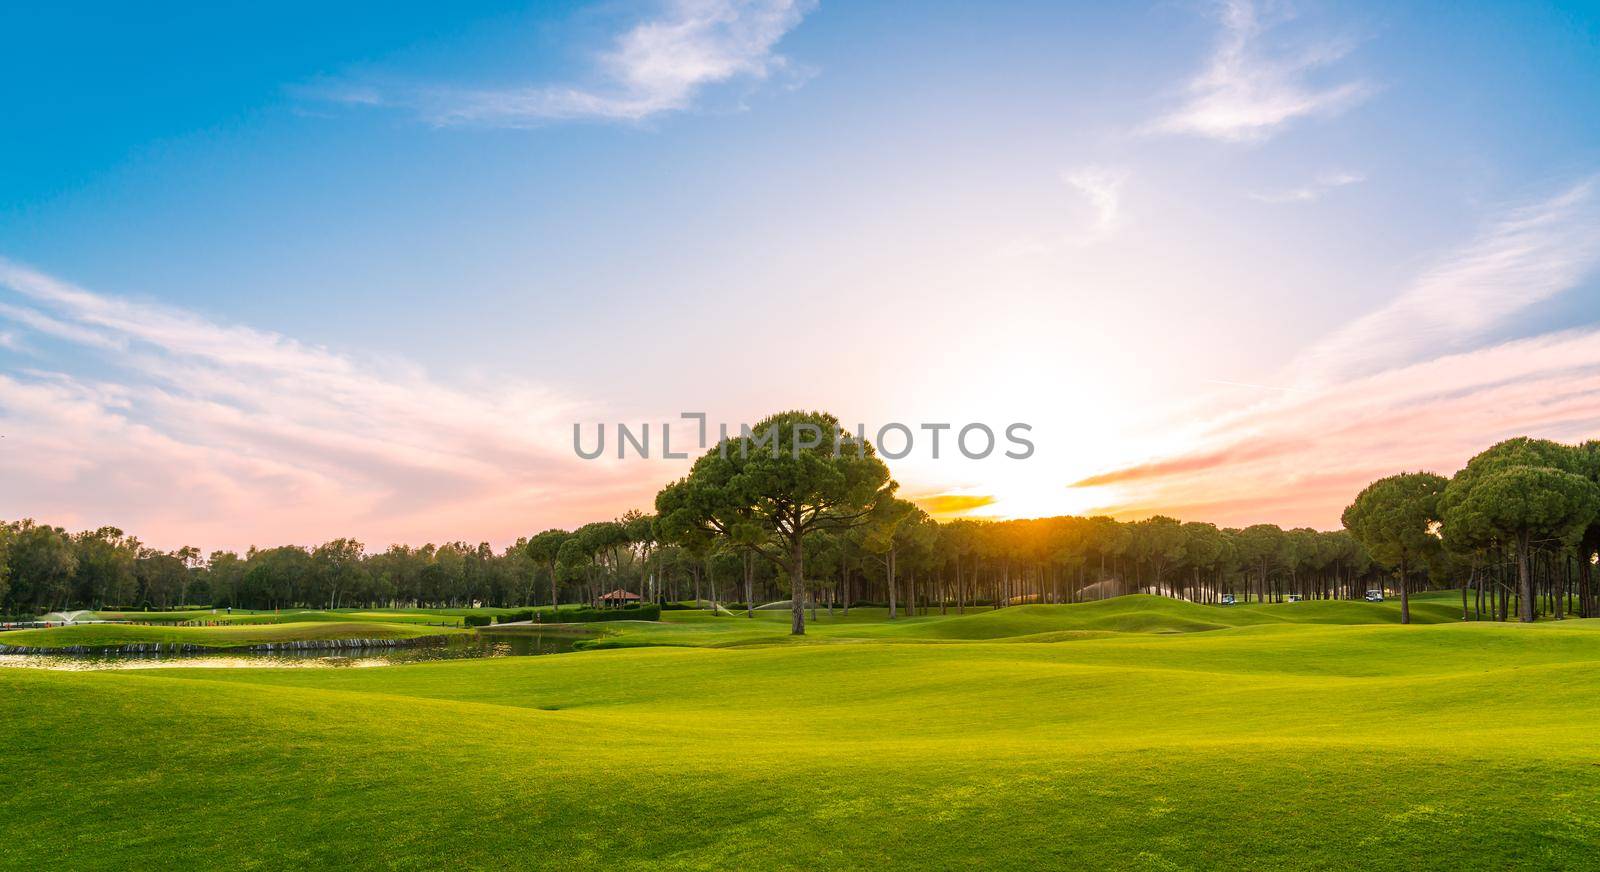 Golf course at sunset with beautiful sky. Scenic panoramic view of golf fairway